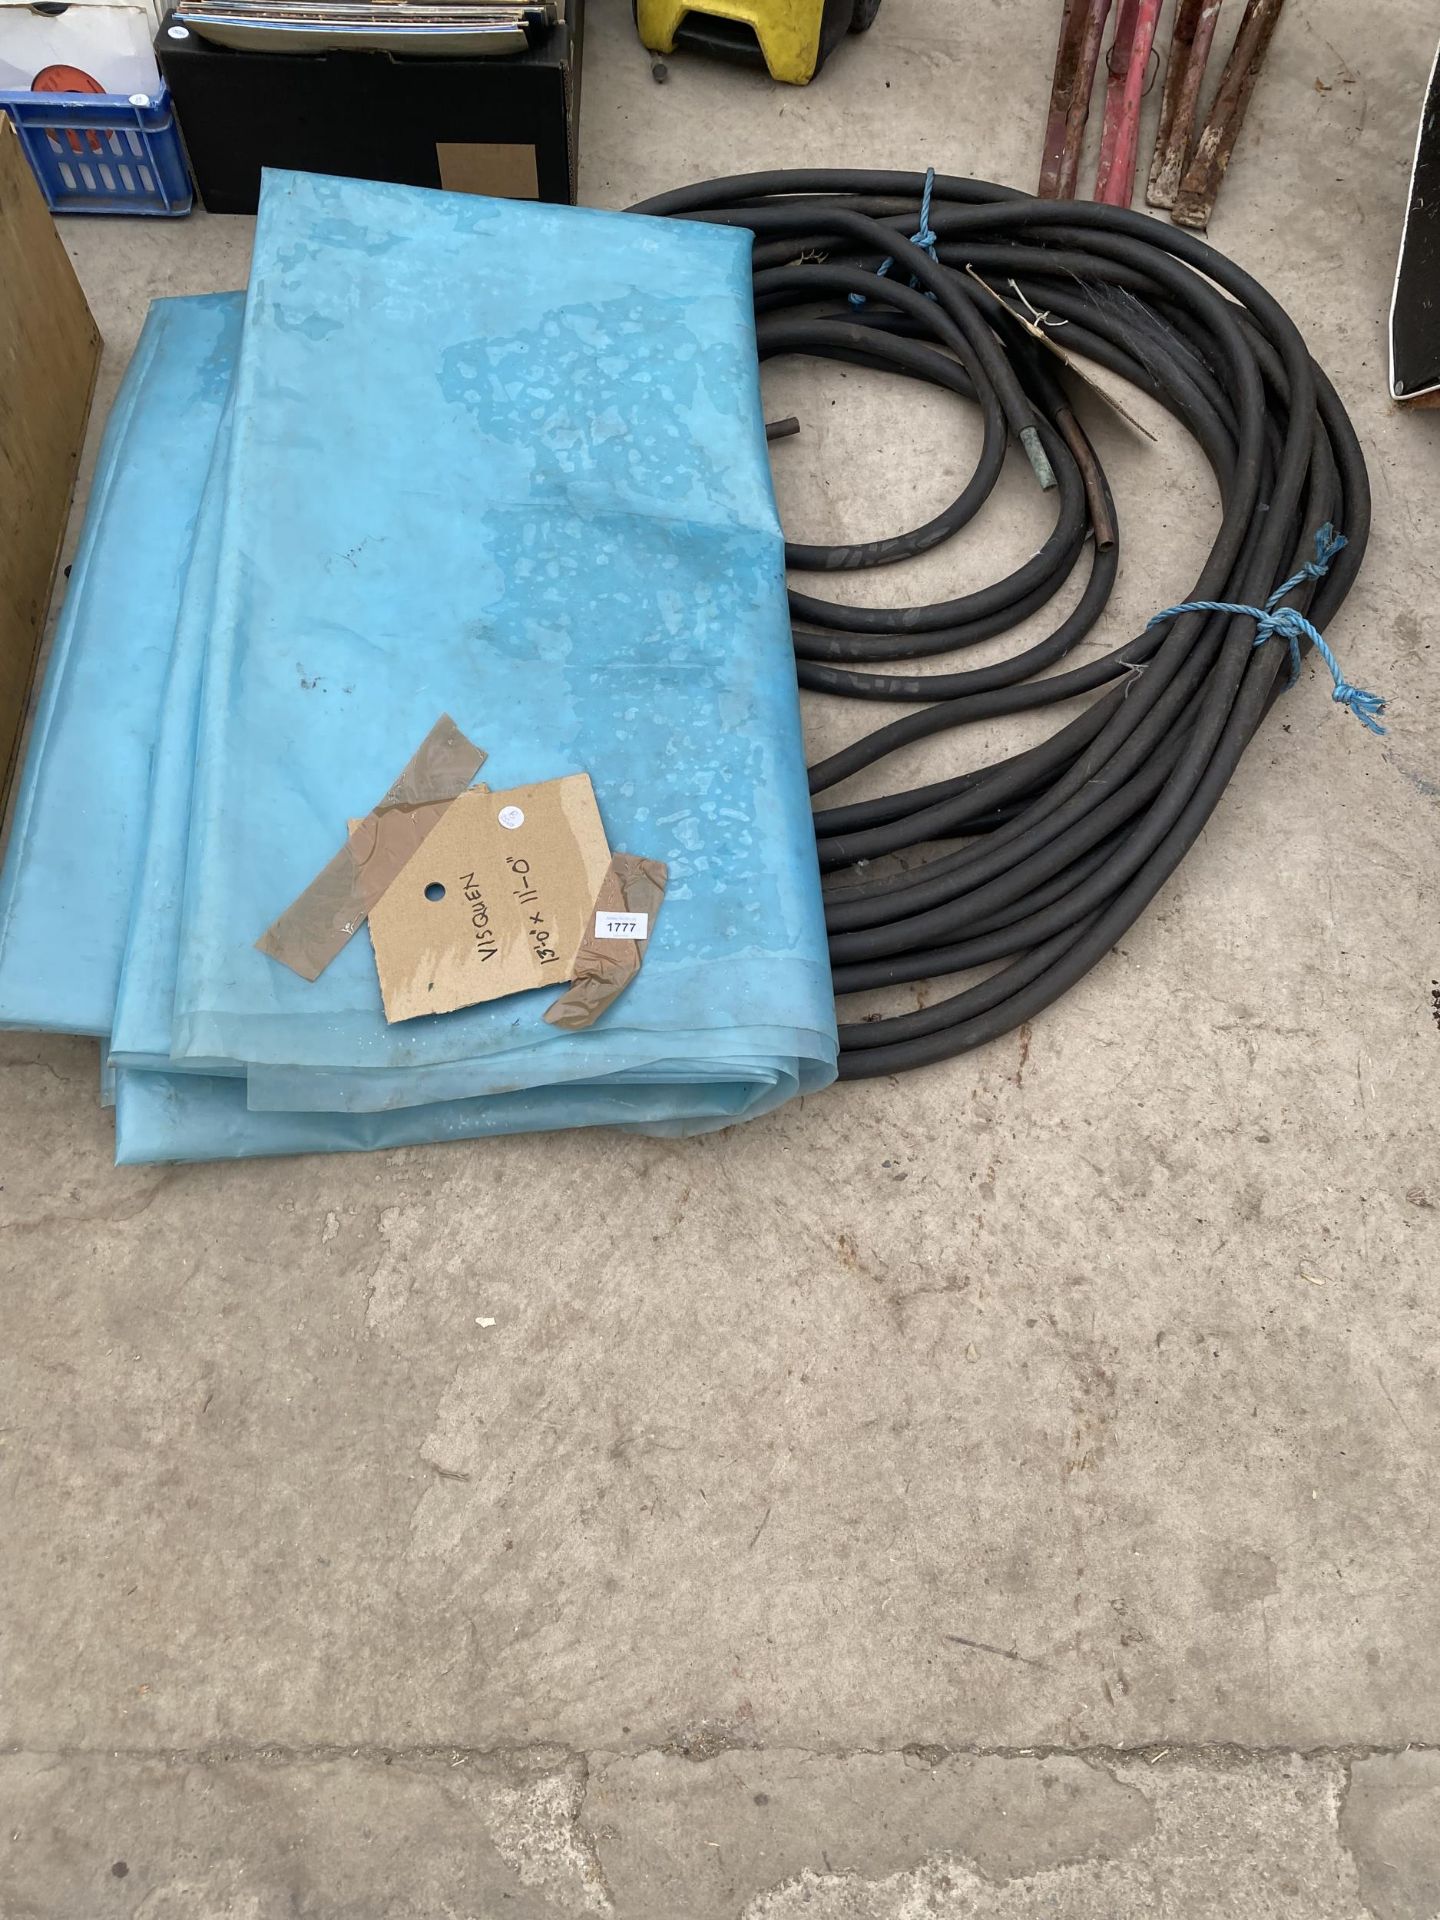 A LARGE QUANTITY OF RUBBER HOSE AND A SHEET OF VISQUEN